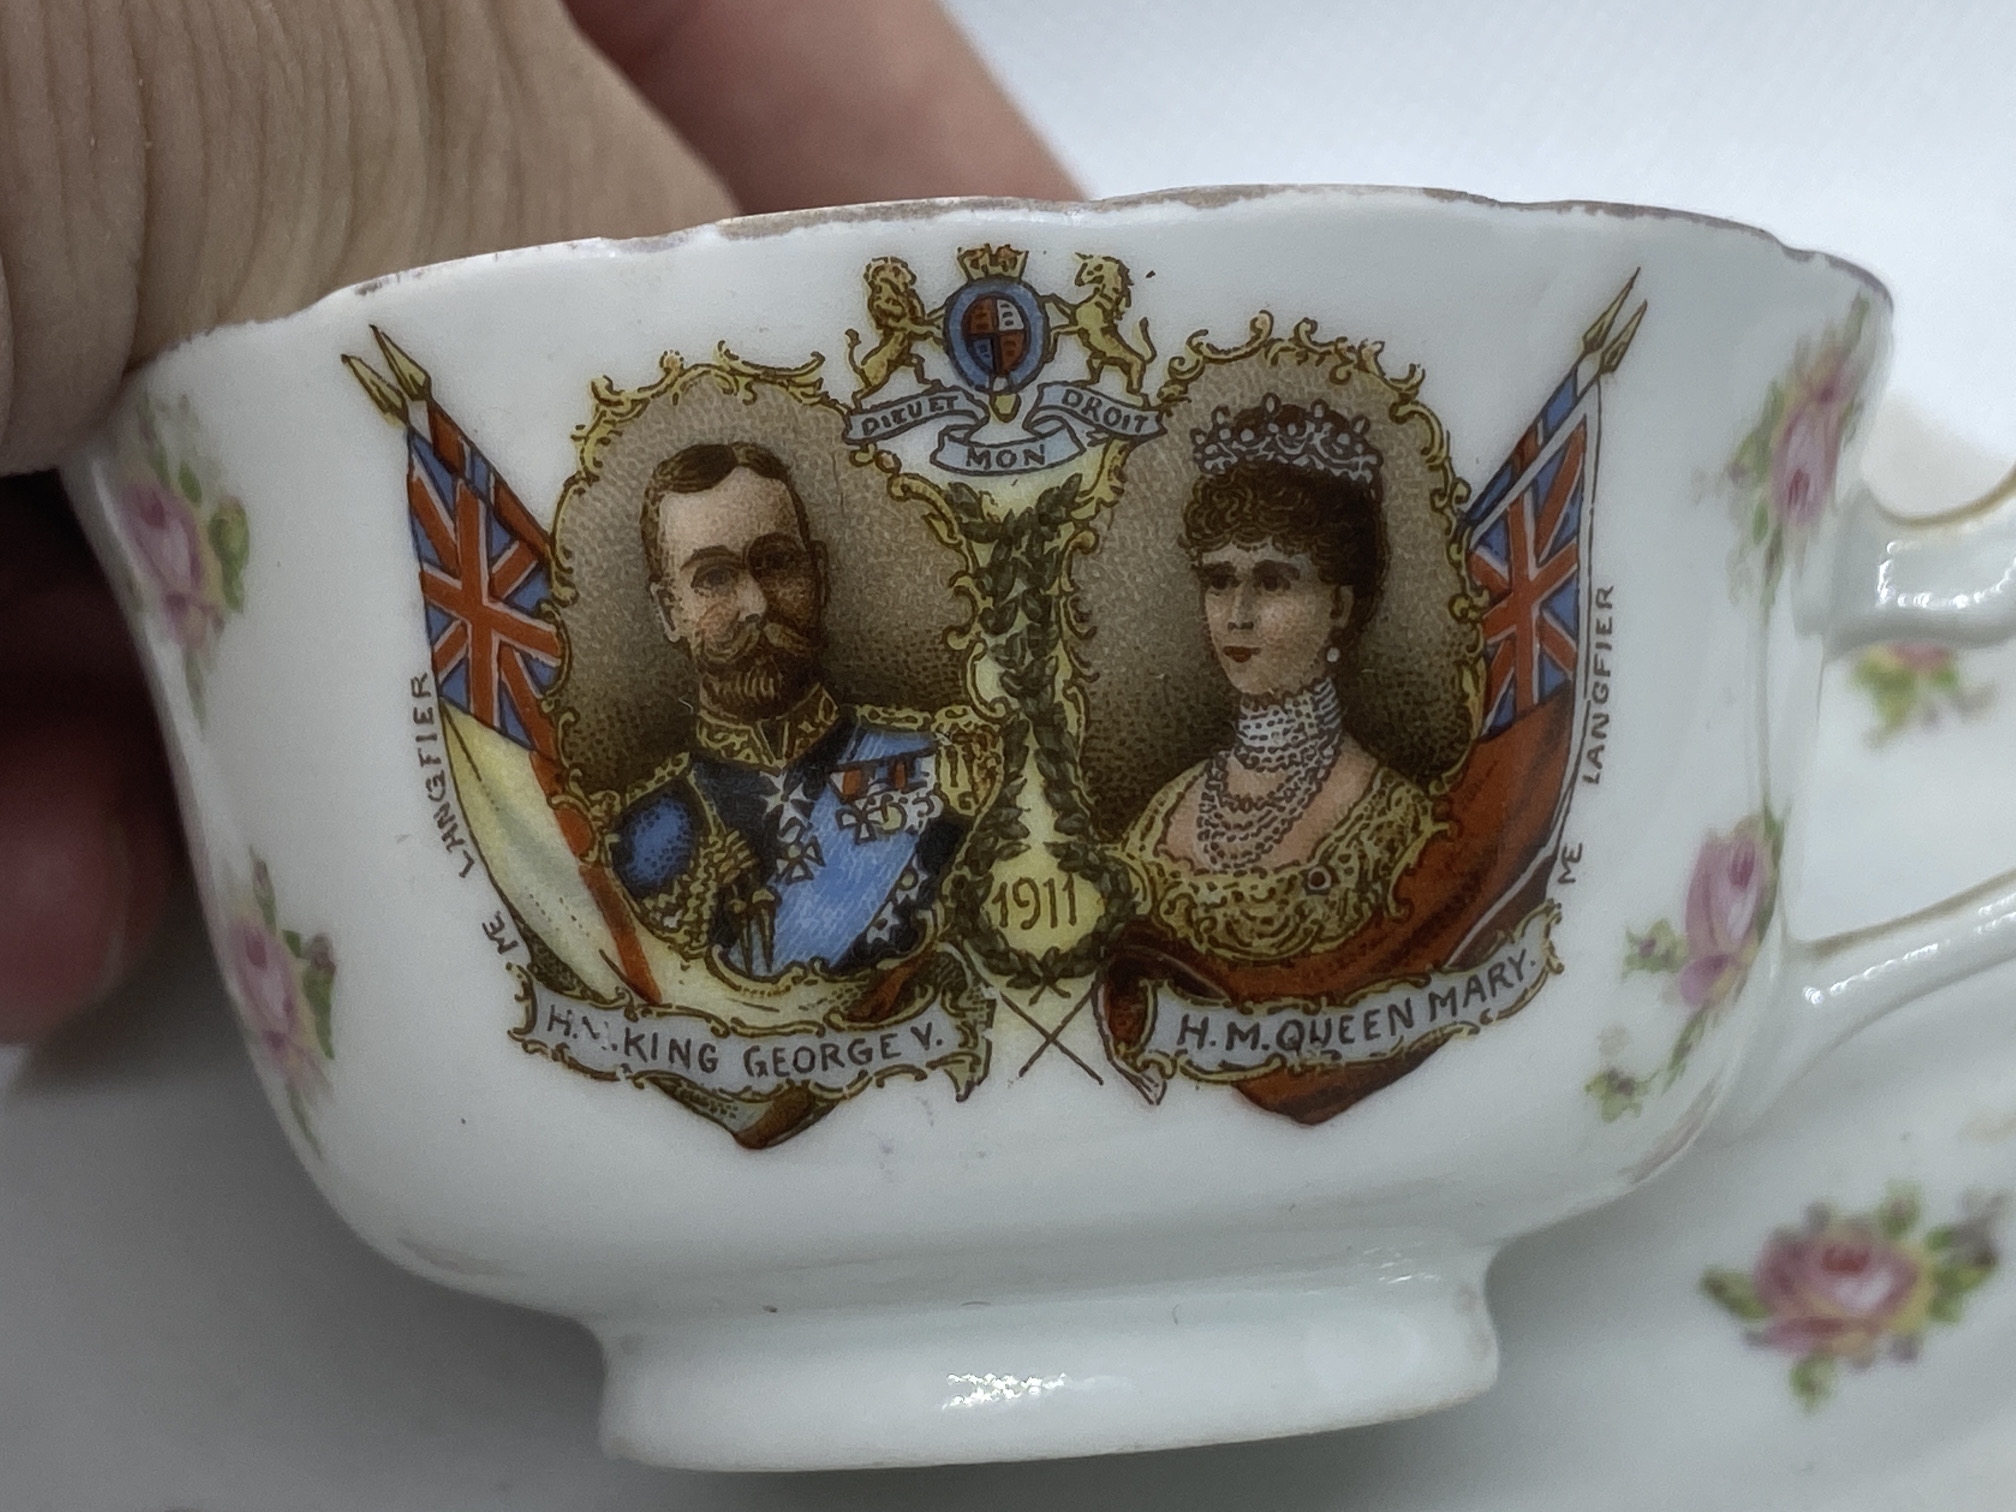 PORCELAIN 1911 KING GEORGE V & QUEEN MARY CUP & SAUCER - LANGFIER